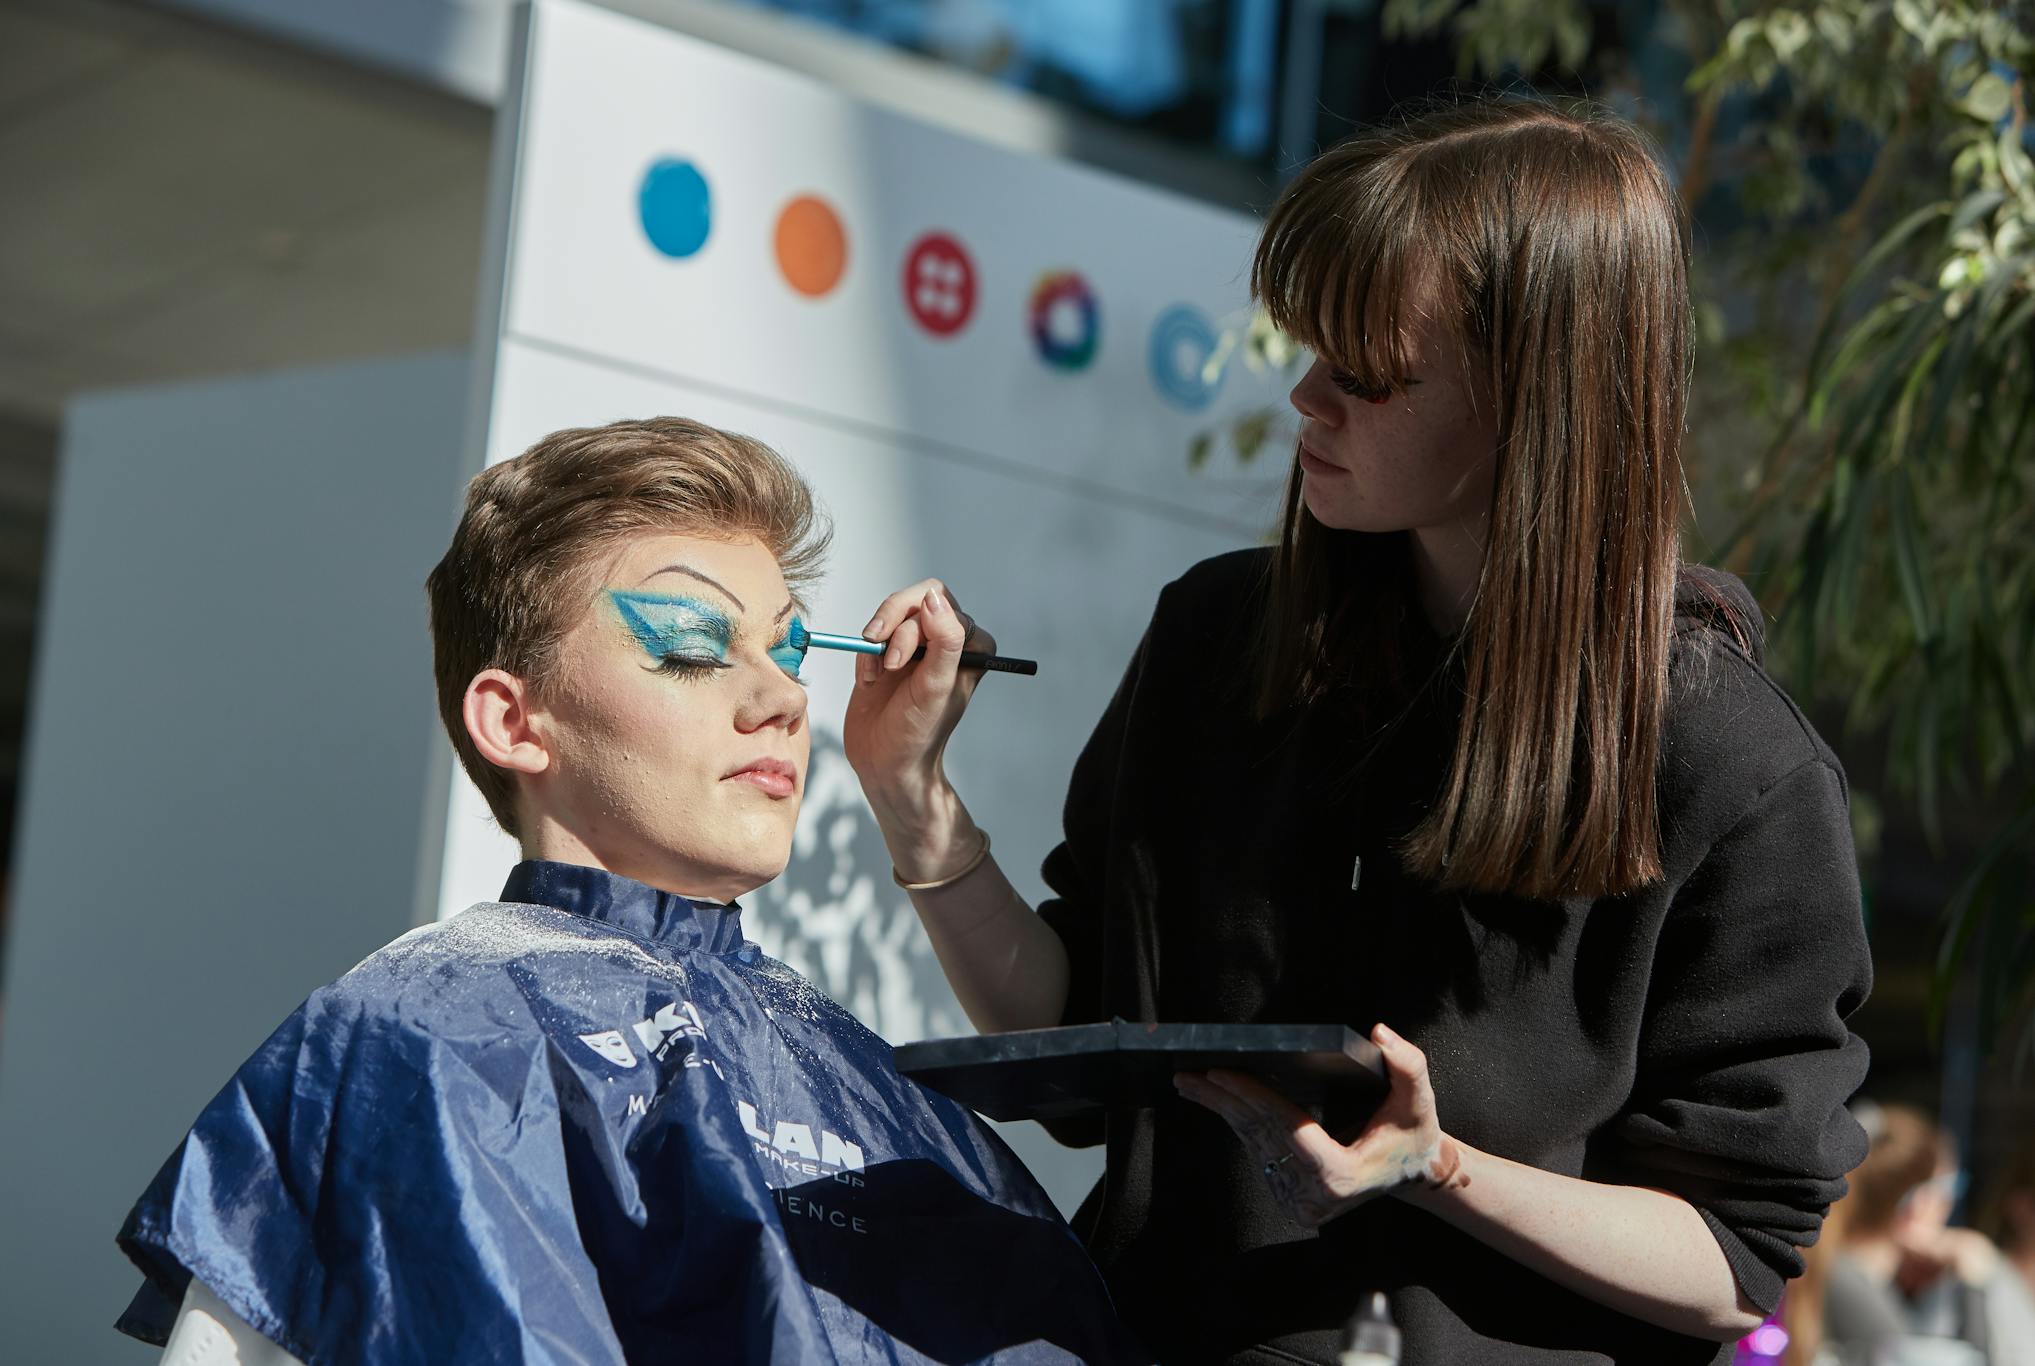 Young person having blue eye make up applied with brush